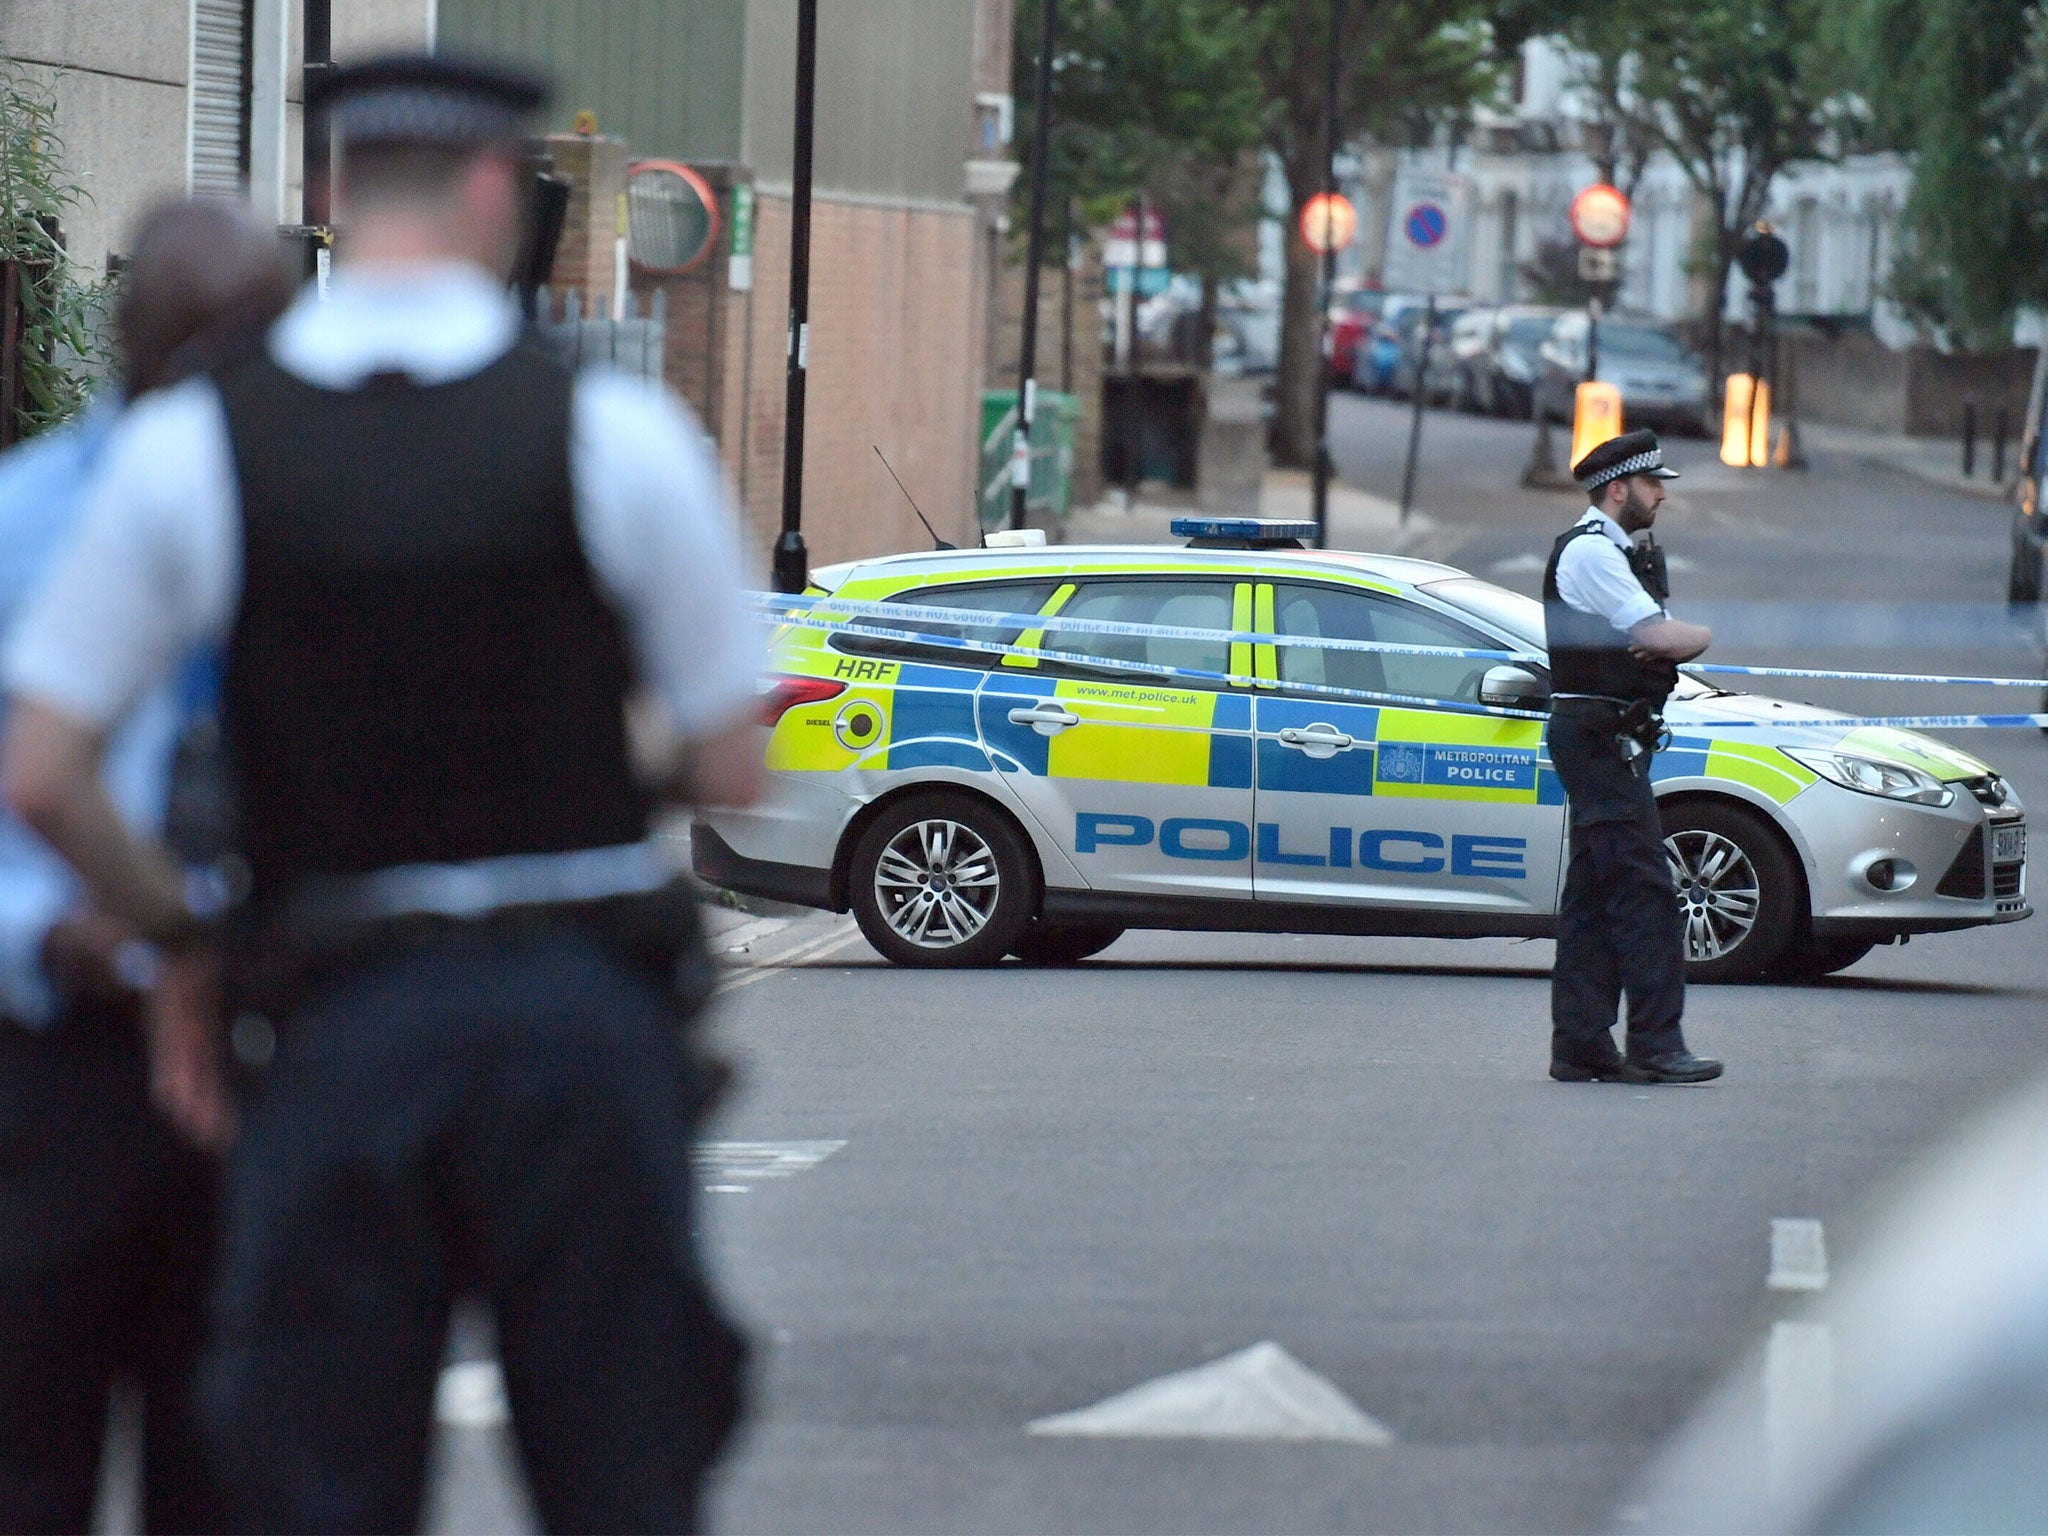 Police on the scene of the attack in Islington on Sunday evening